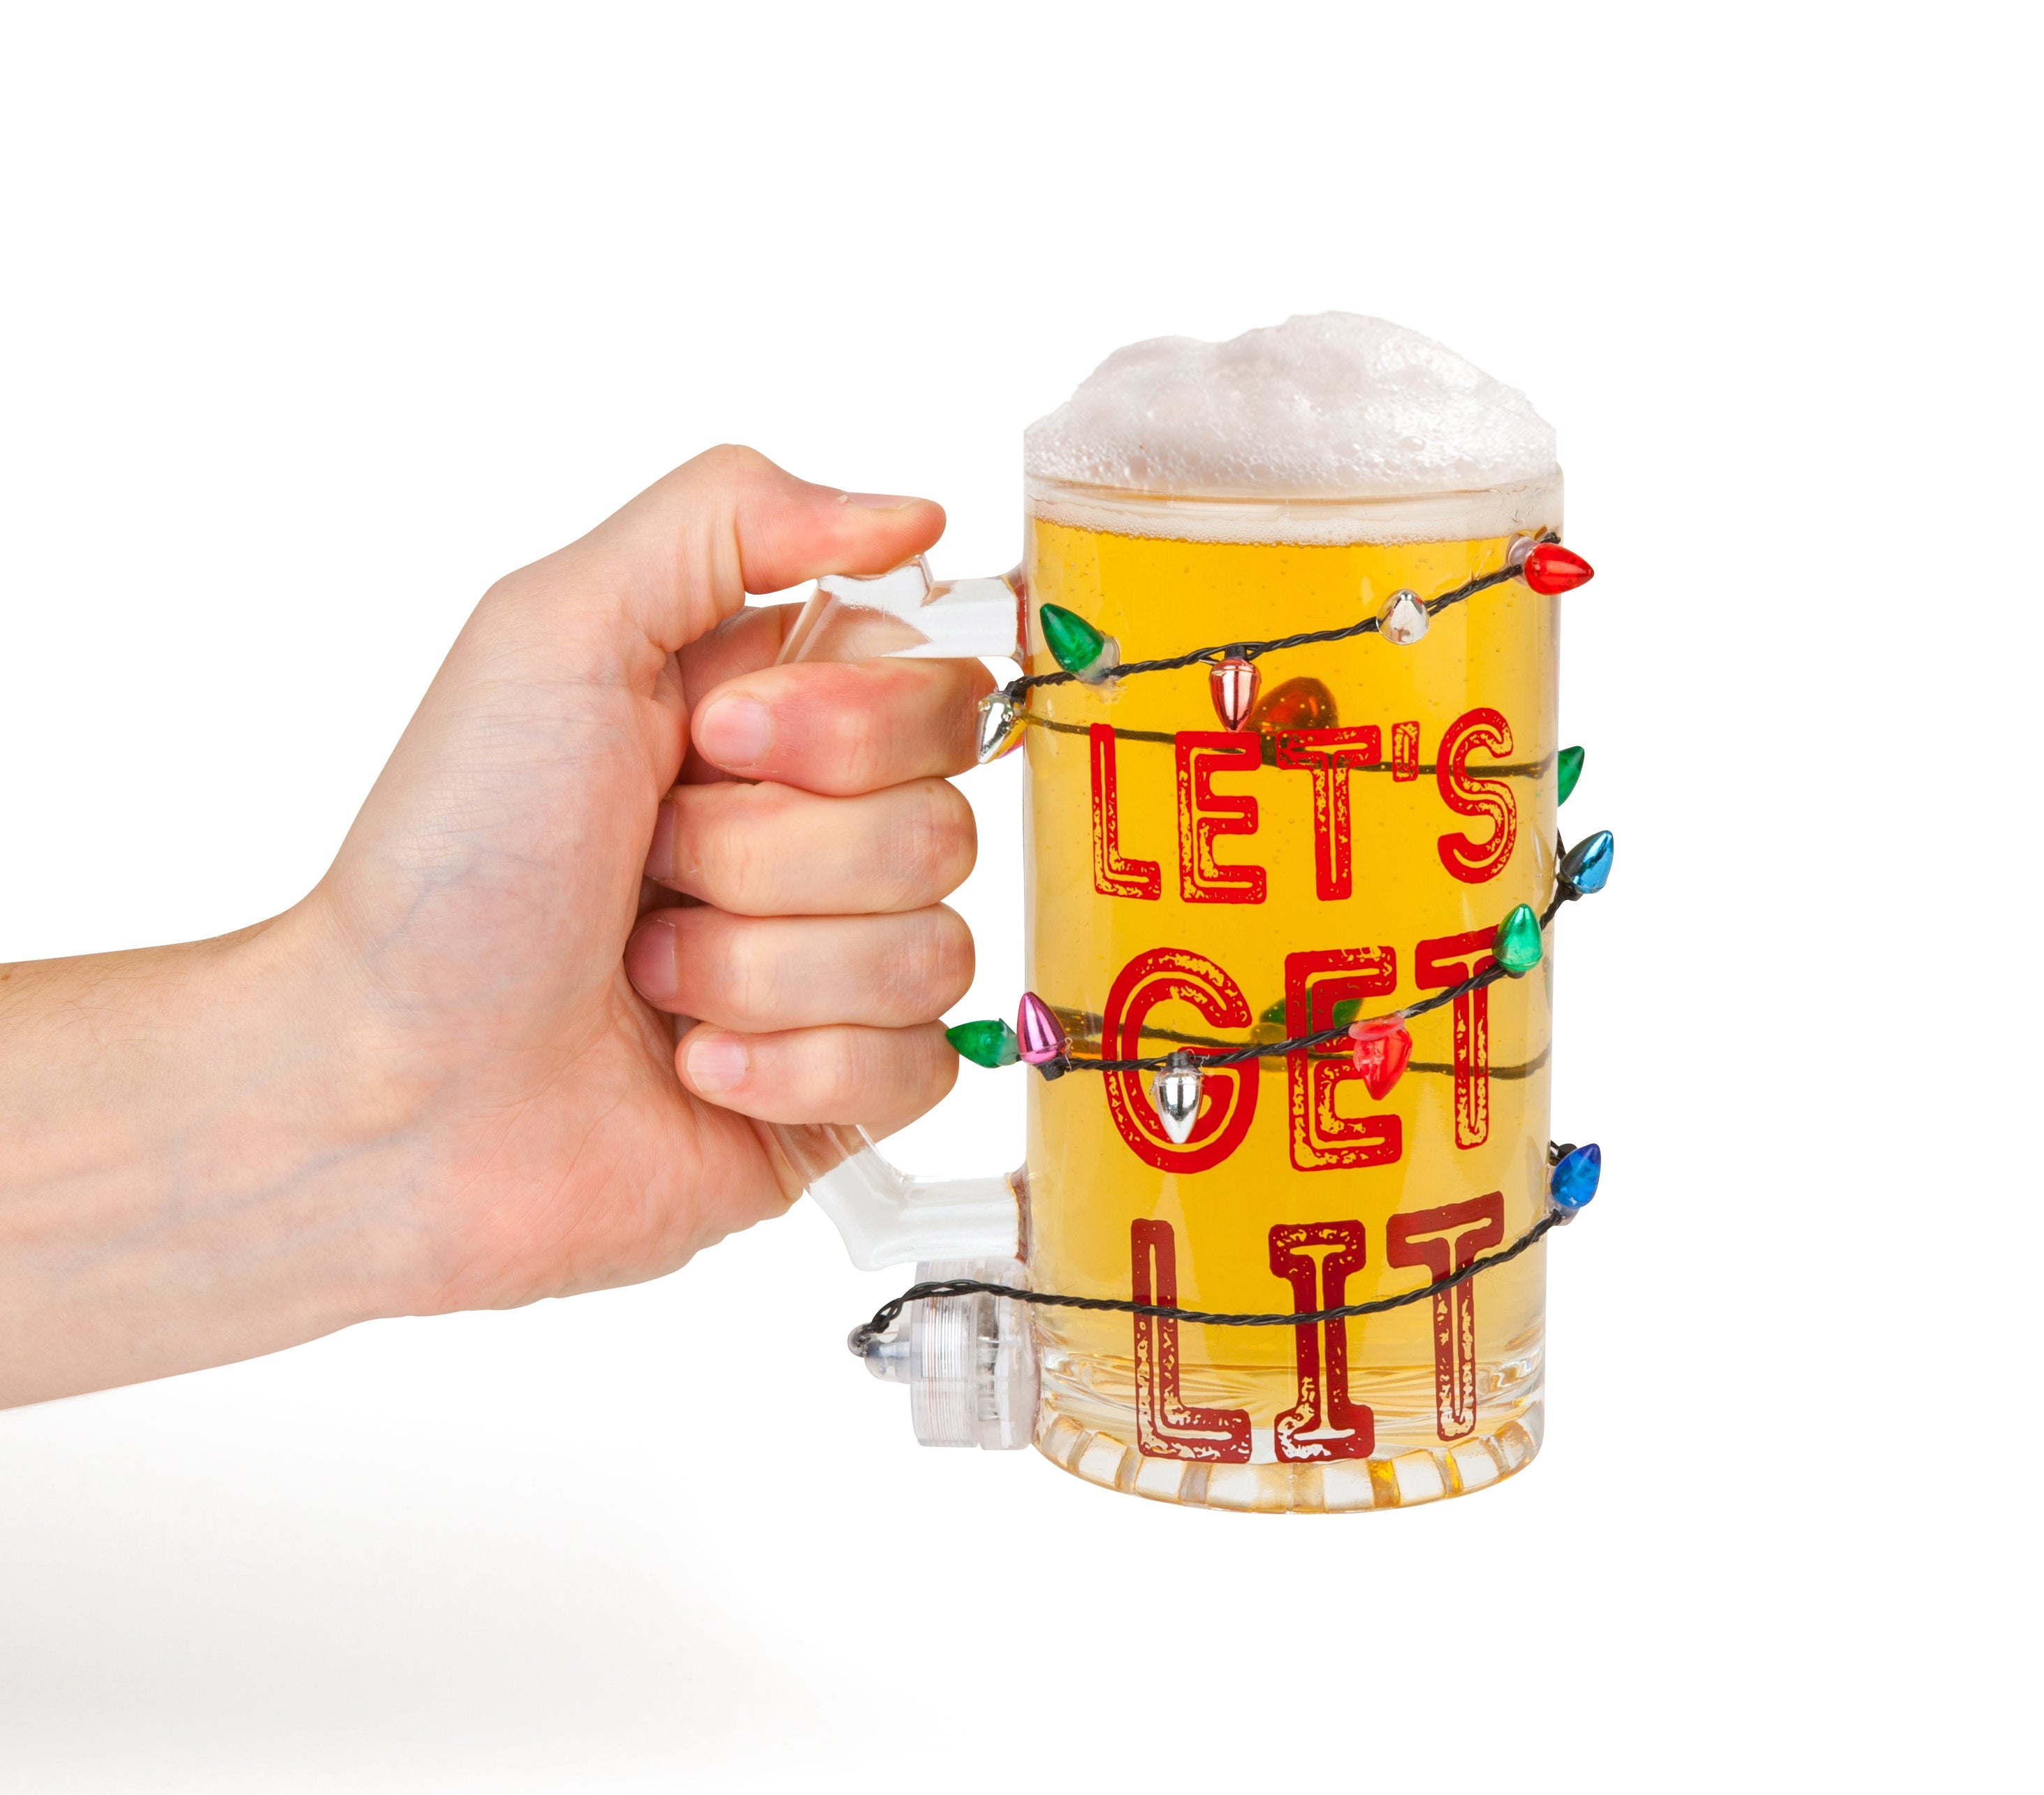 Let's Get Lit Personalized Christmas 16oz Beer Can Glass